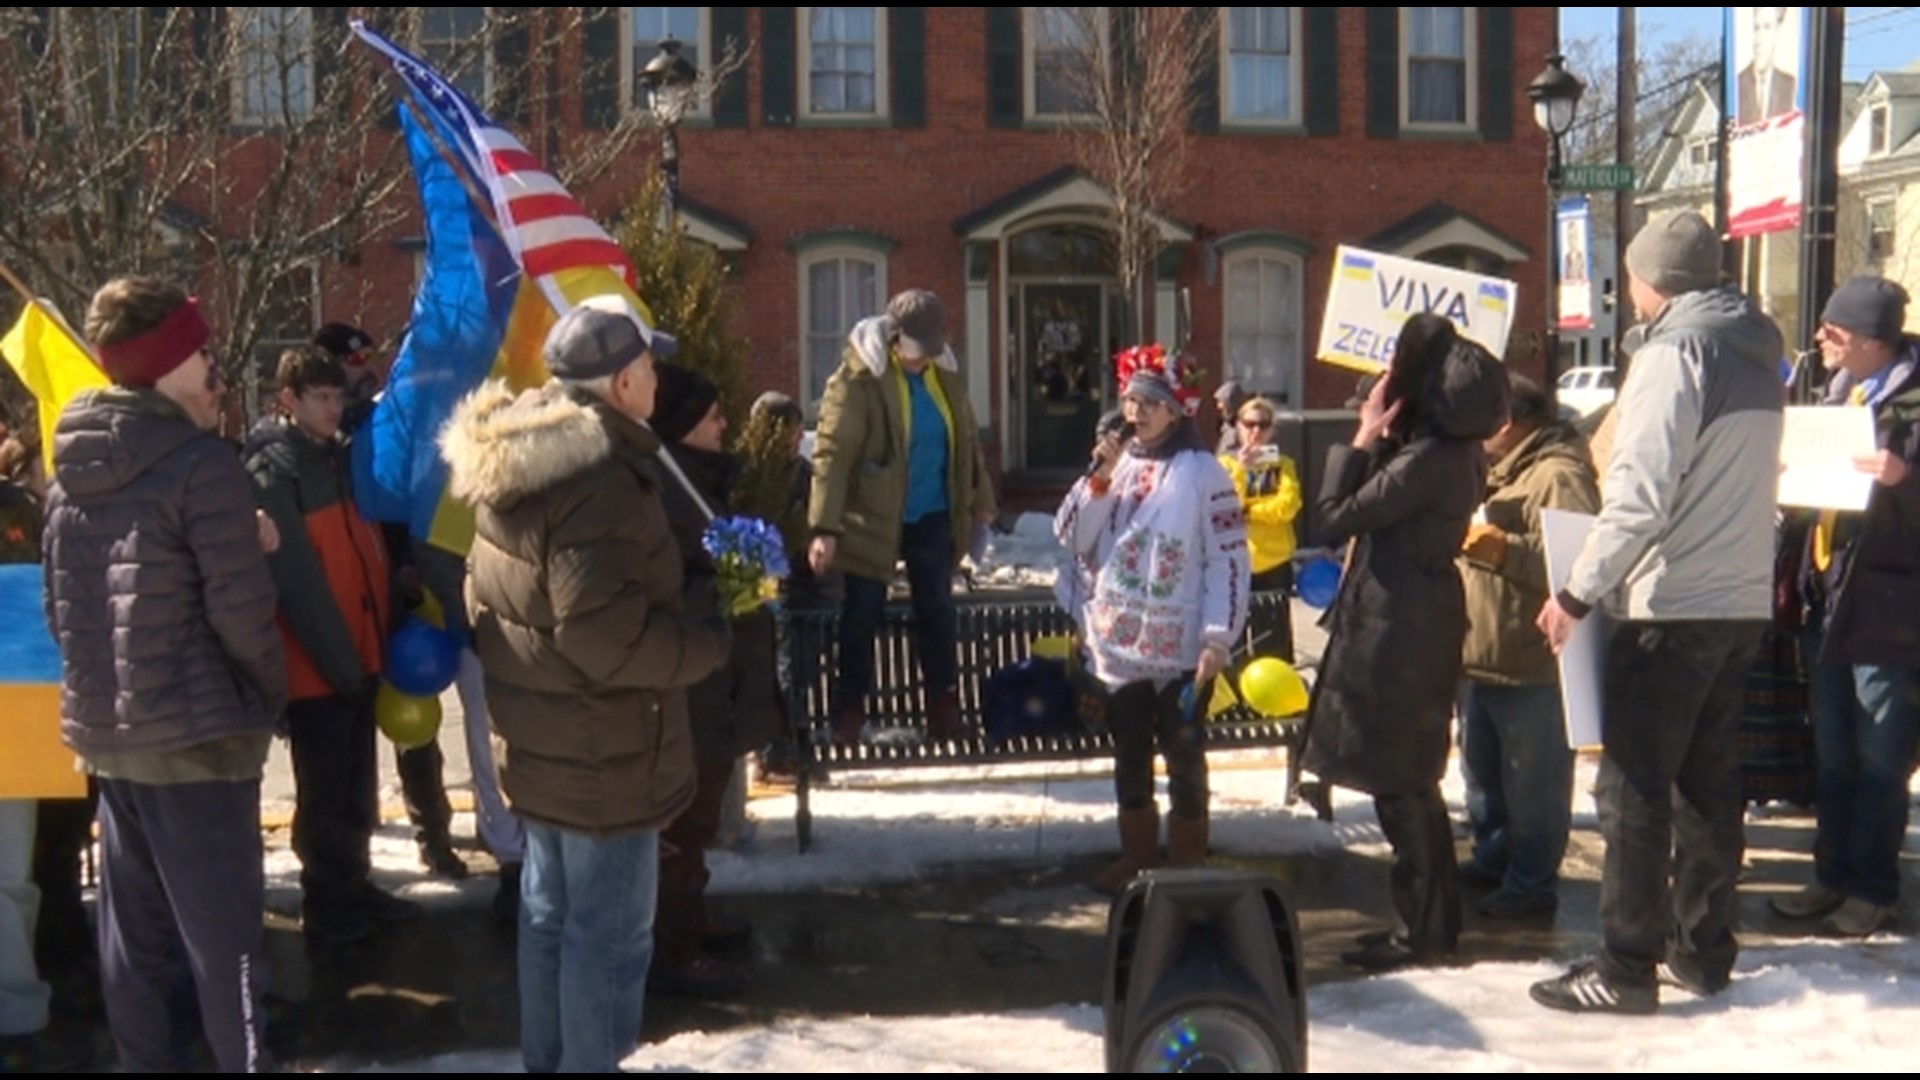 Support for Ukraine continues in the U.S., and in Monroe County a demonstration was held with locals from several parts of the world, demanding peace.